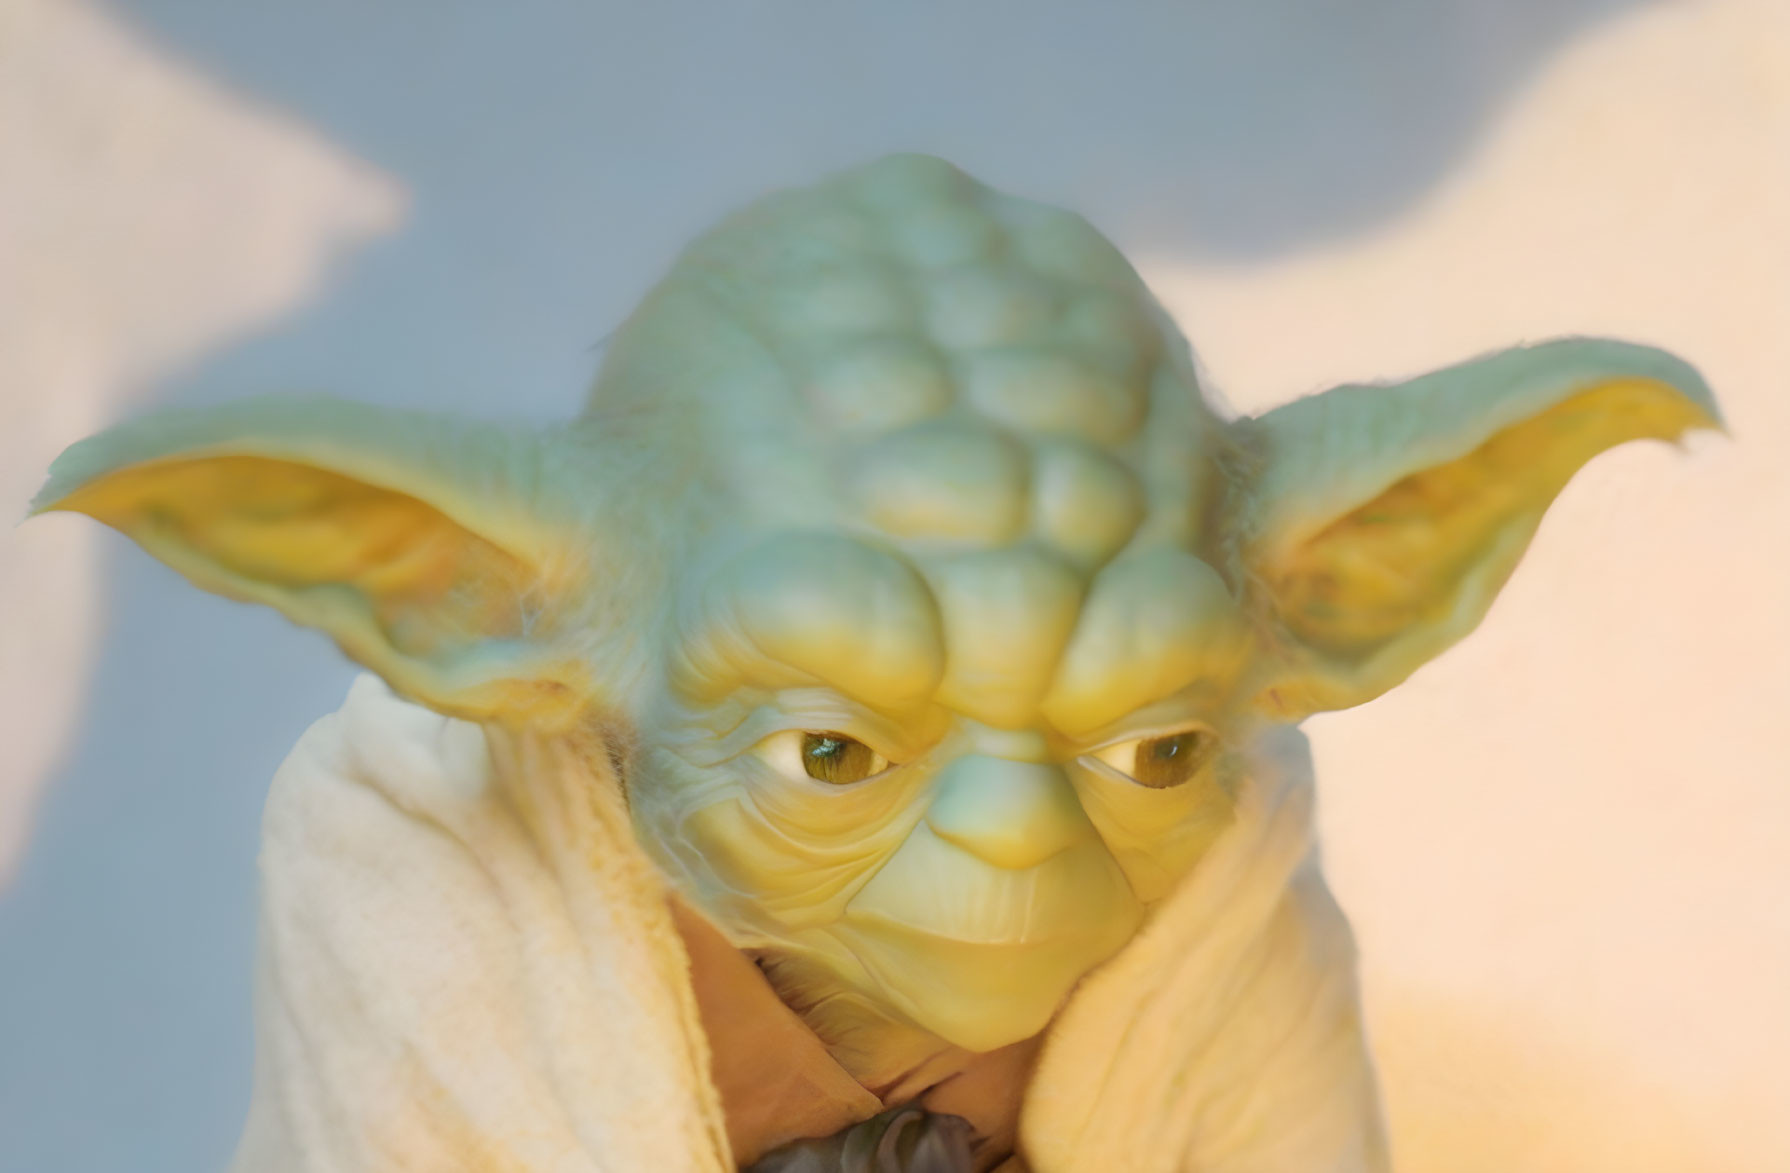 Detailed Yoda Figure with Large Pointed Ears & Wise Expression